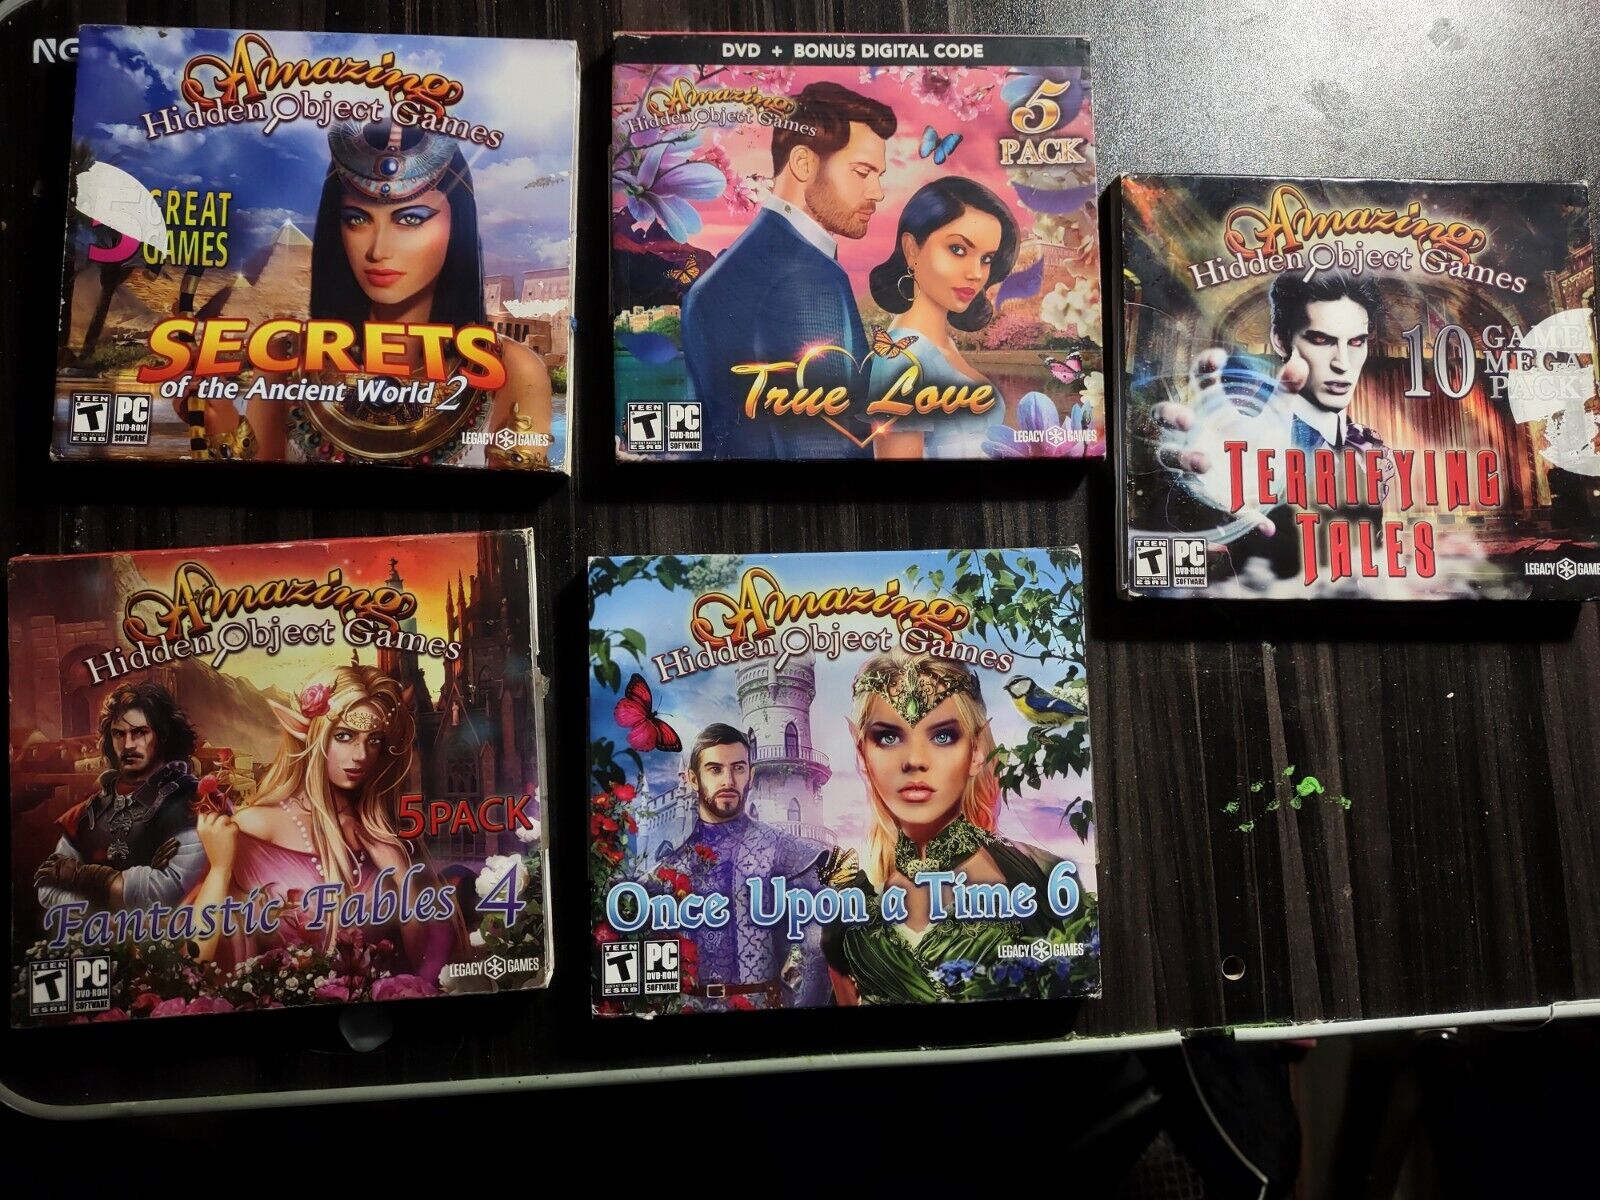 Amazing Hidden Objects Games PC Lot